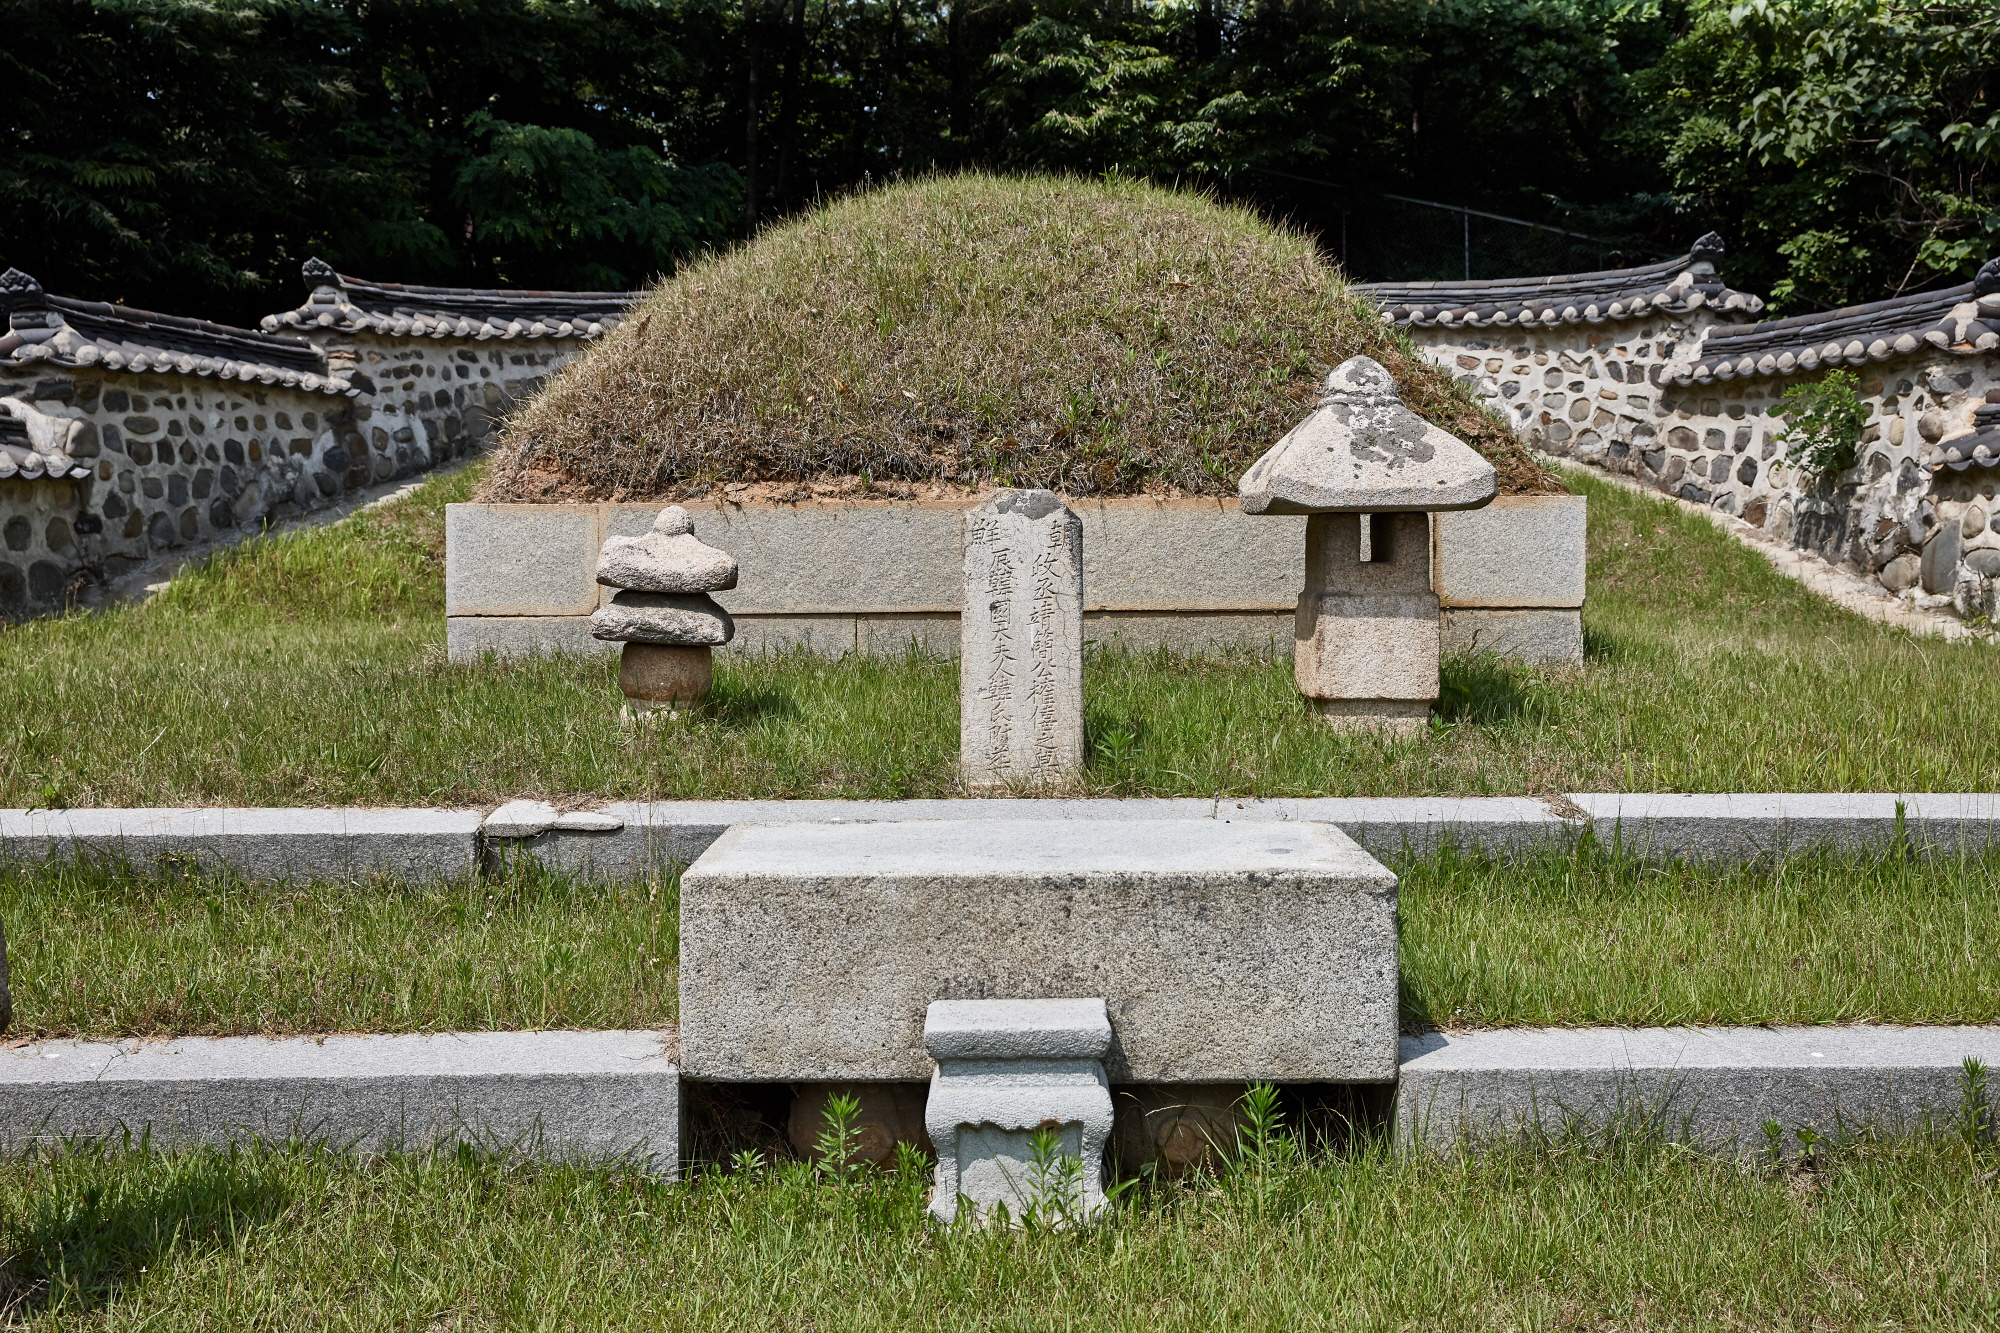 The grave of Kwon Hee